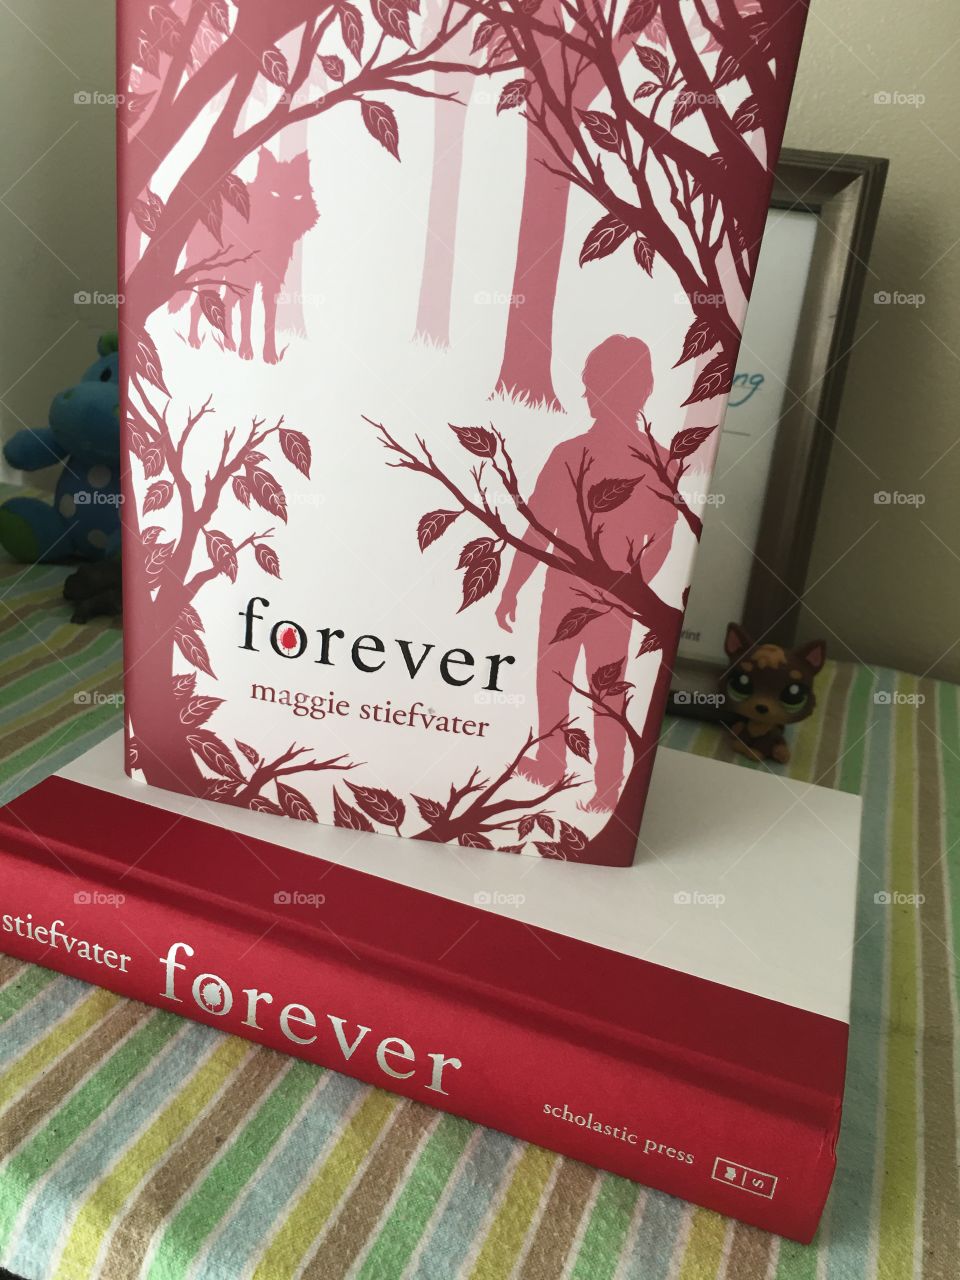 Forever is the last book in the Shiver Trilogy. I love the red cover of it. 